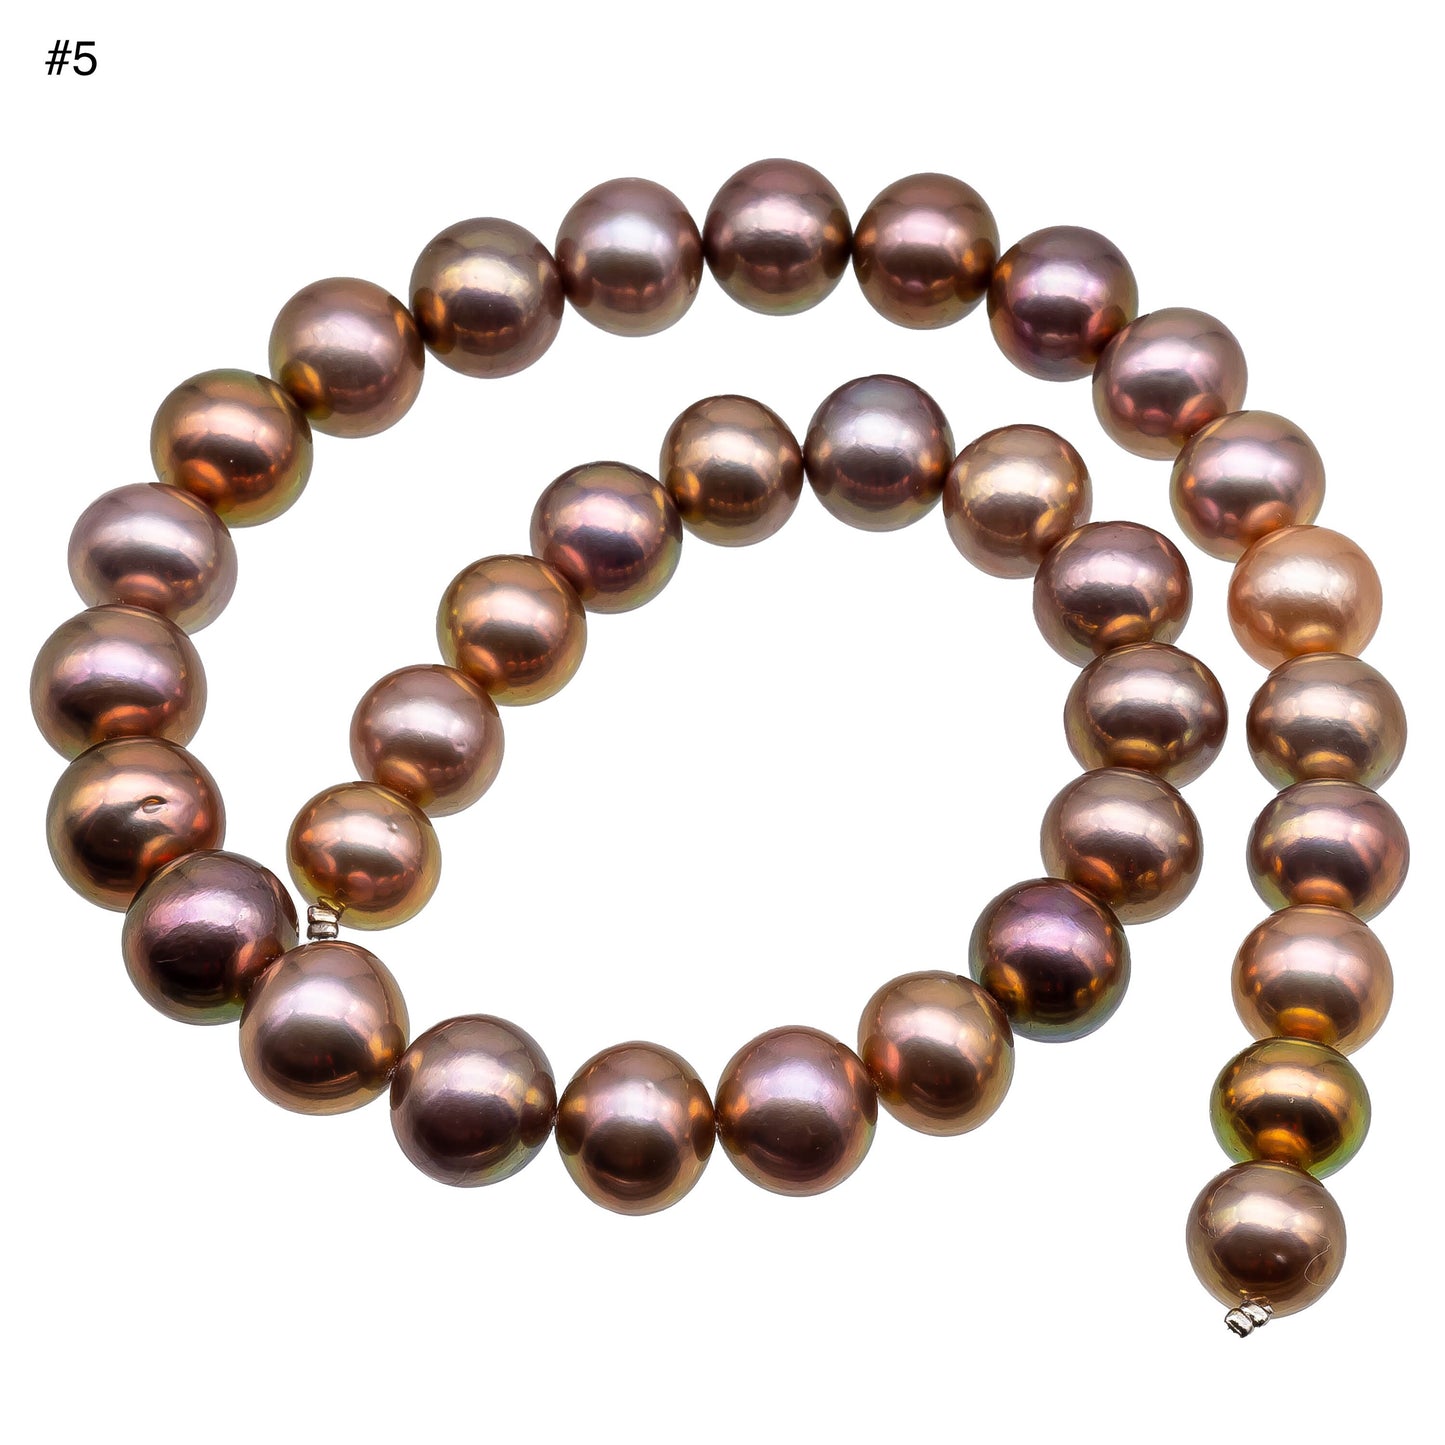 12-14mm Edison Pearl Round or Near Round Natural Mix Color with Extremely Nice Luster, Very Limited Blemish, For Jewelry Making, SKU# 1155EP